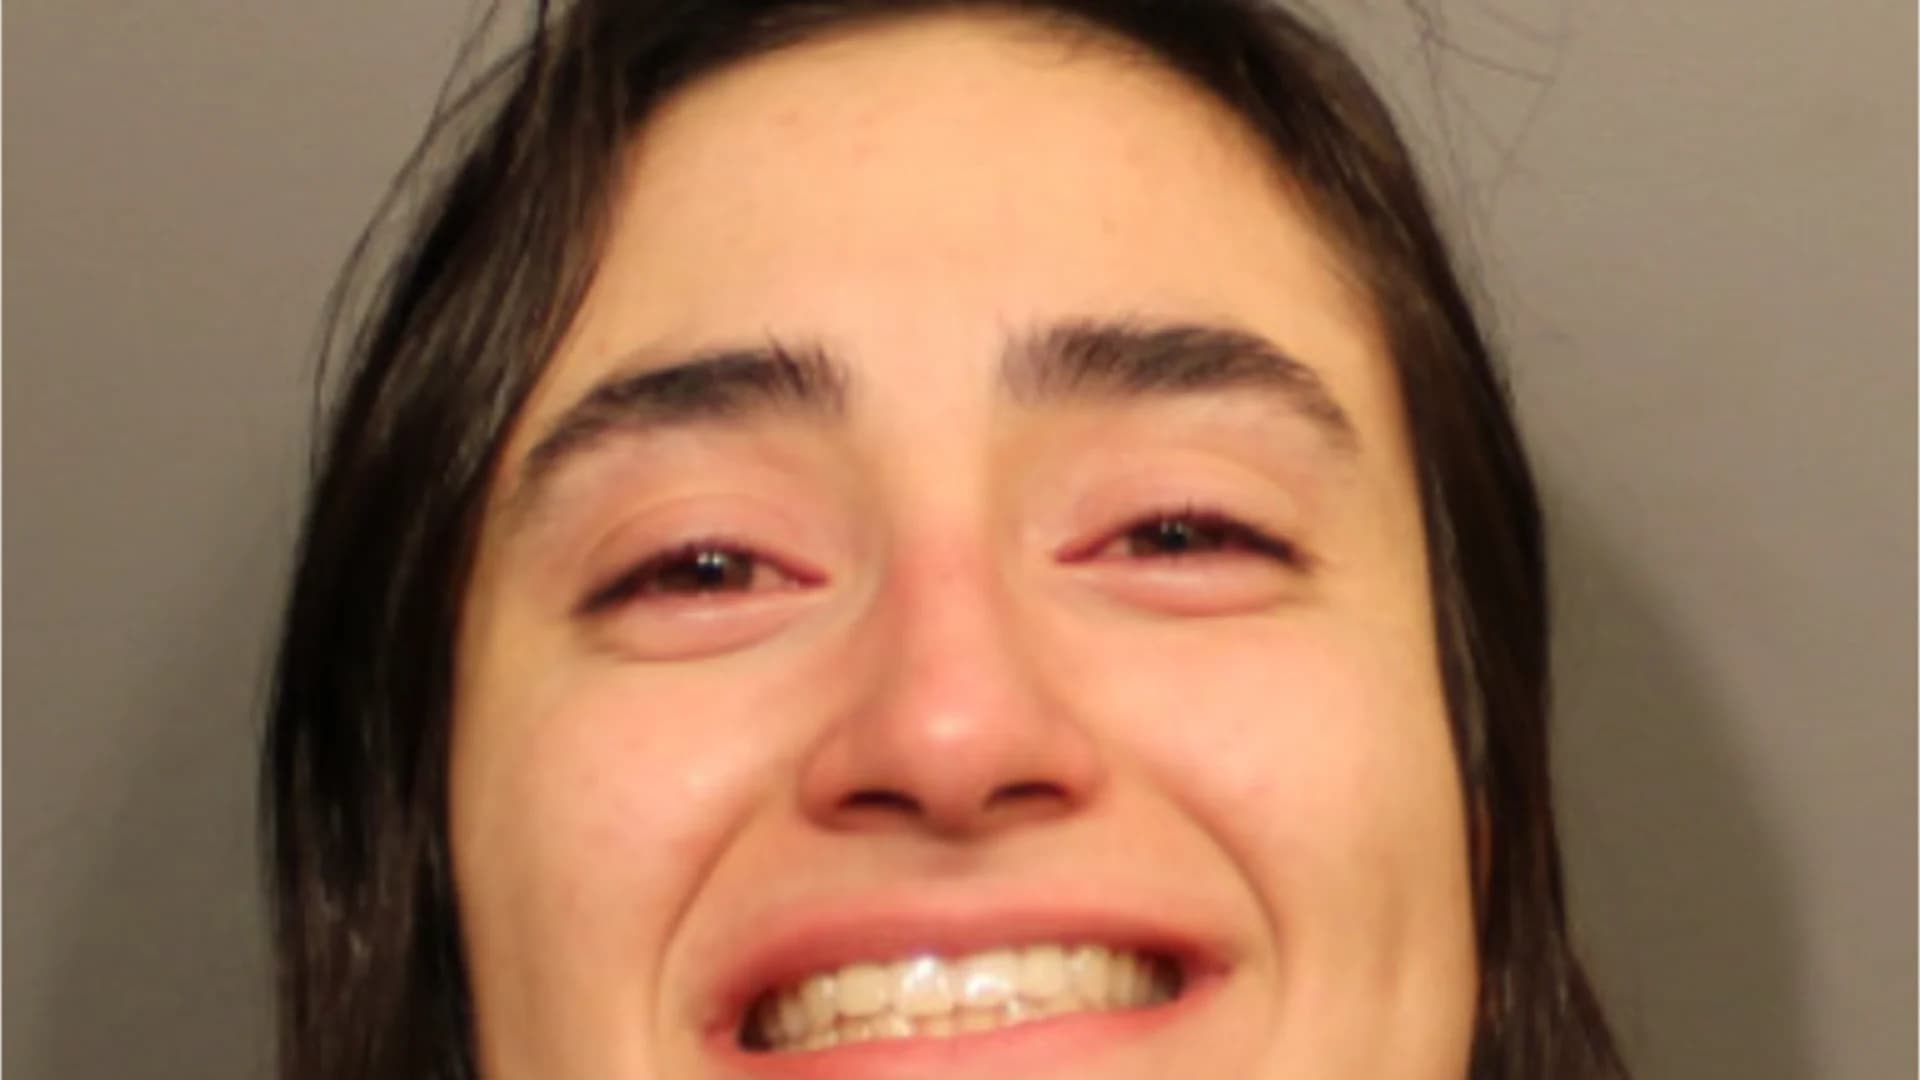 Weston woman charged with DUI smiles in mugshot following arrest